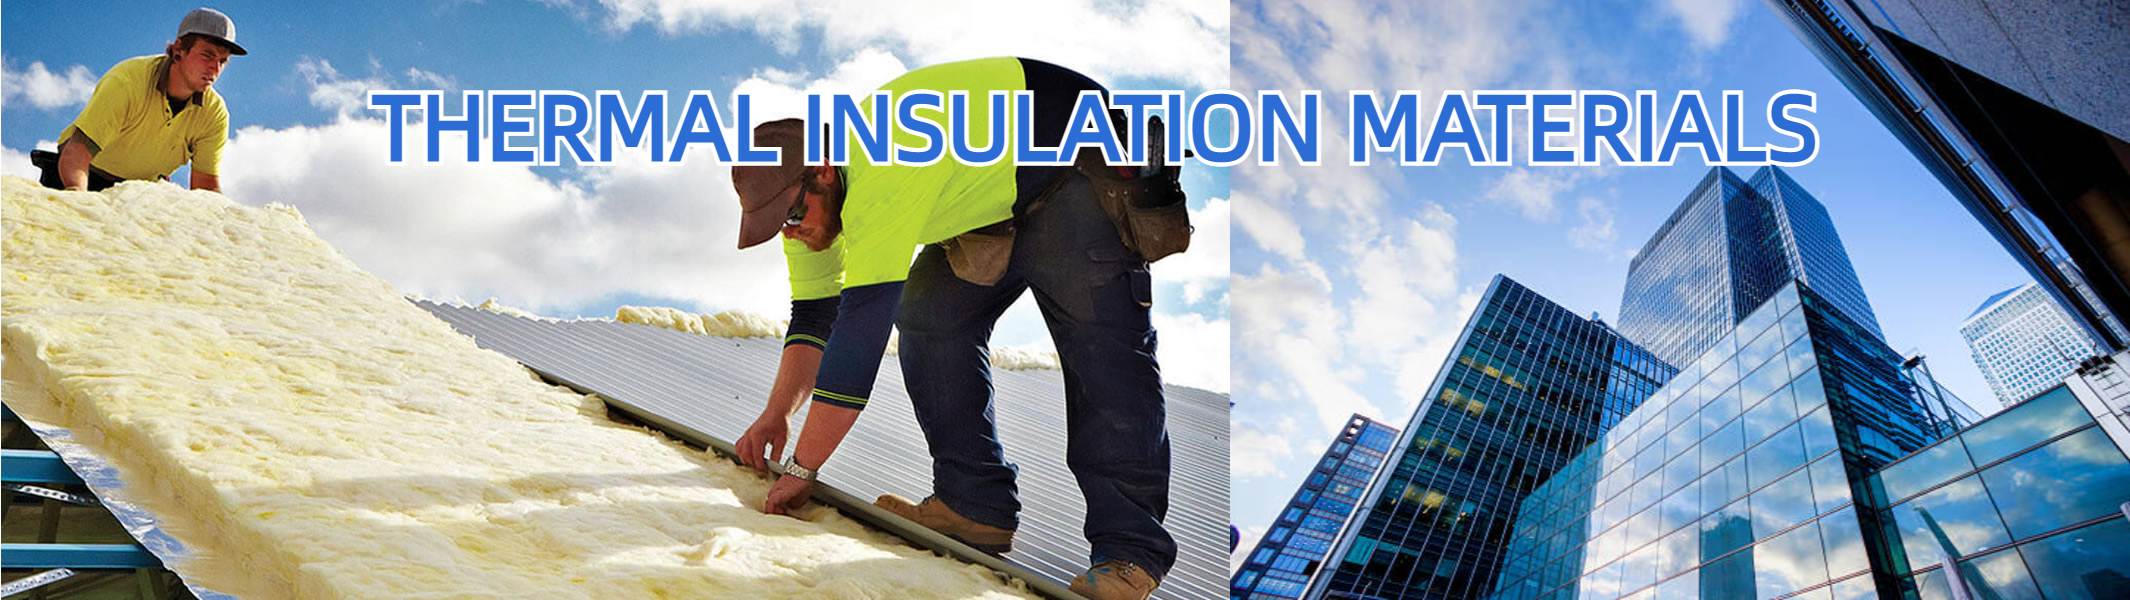 We focus on thermal insulation